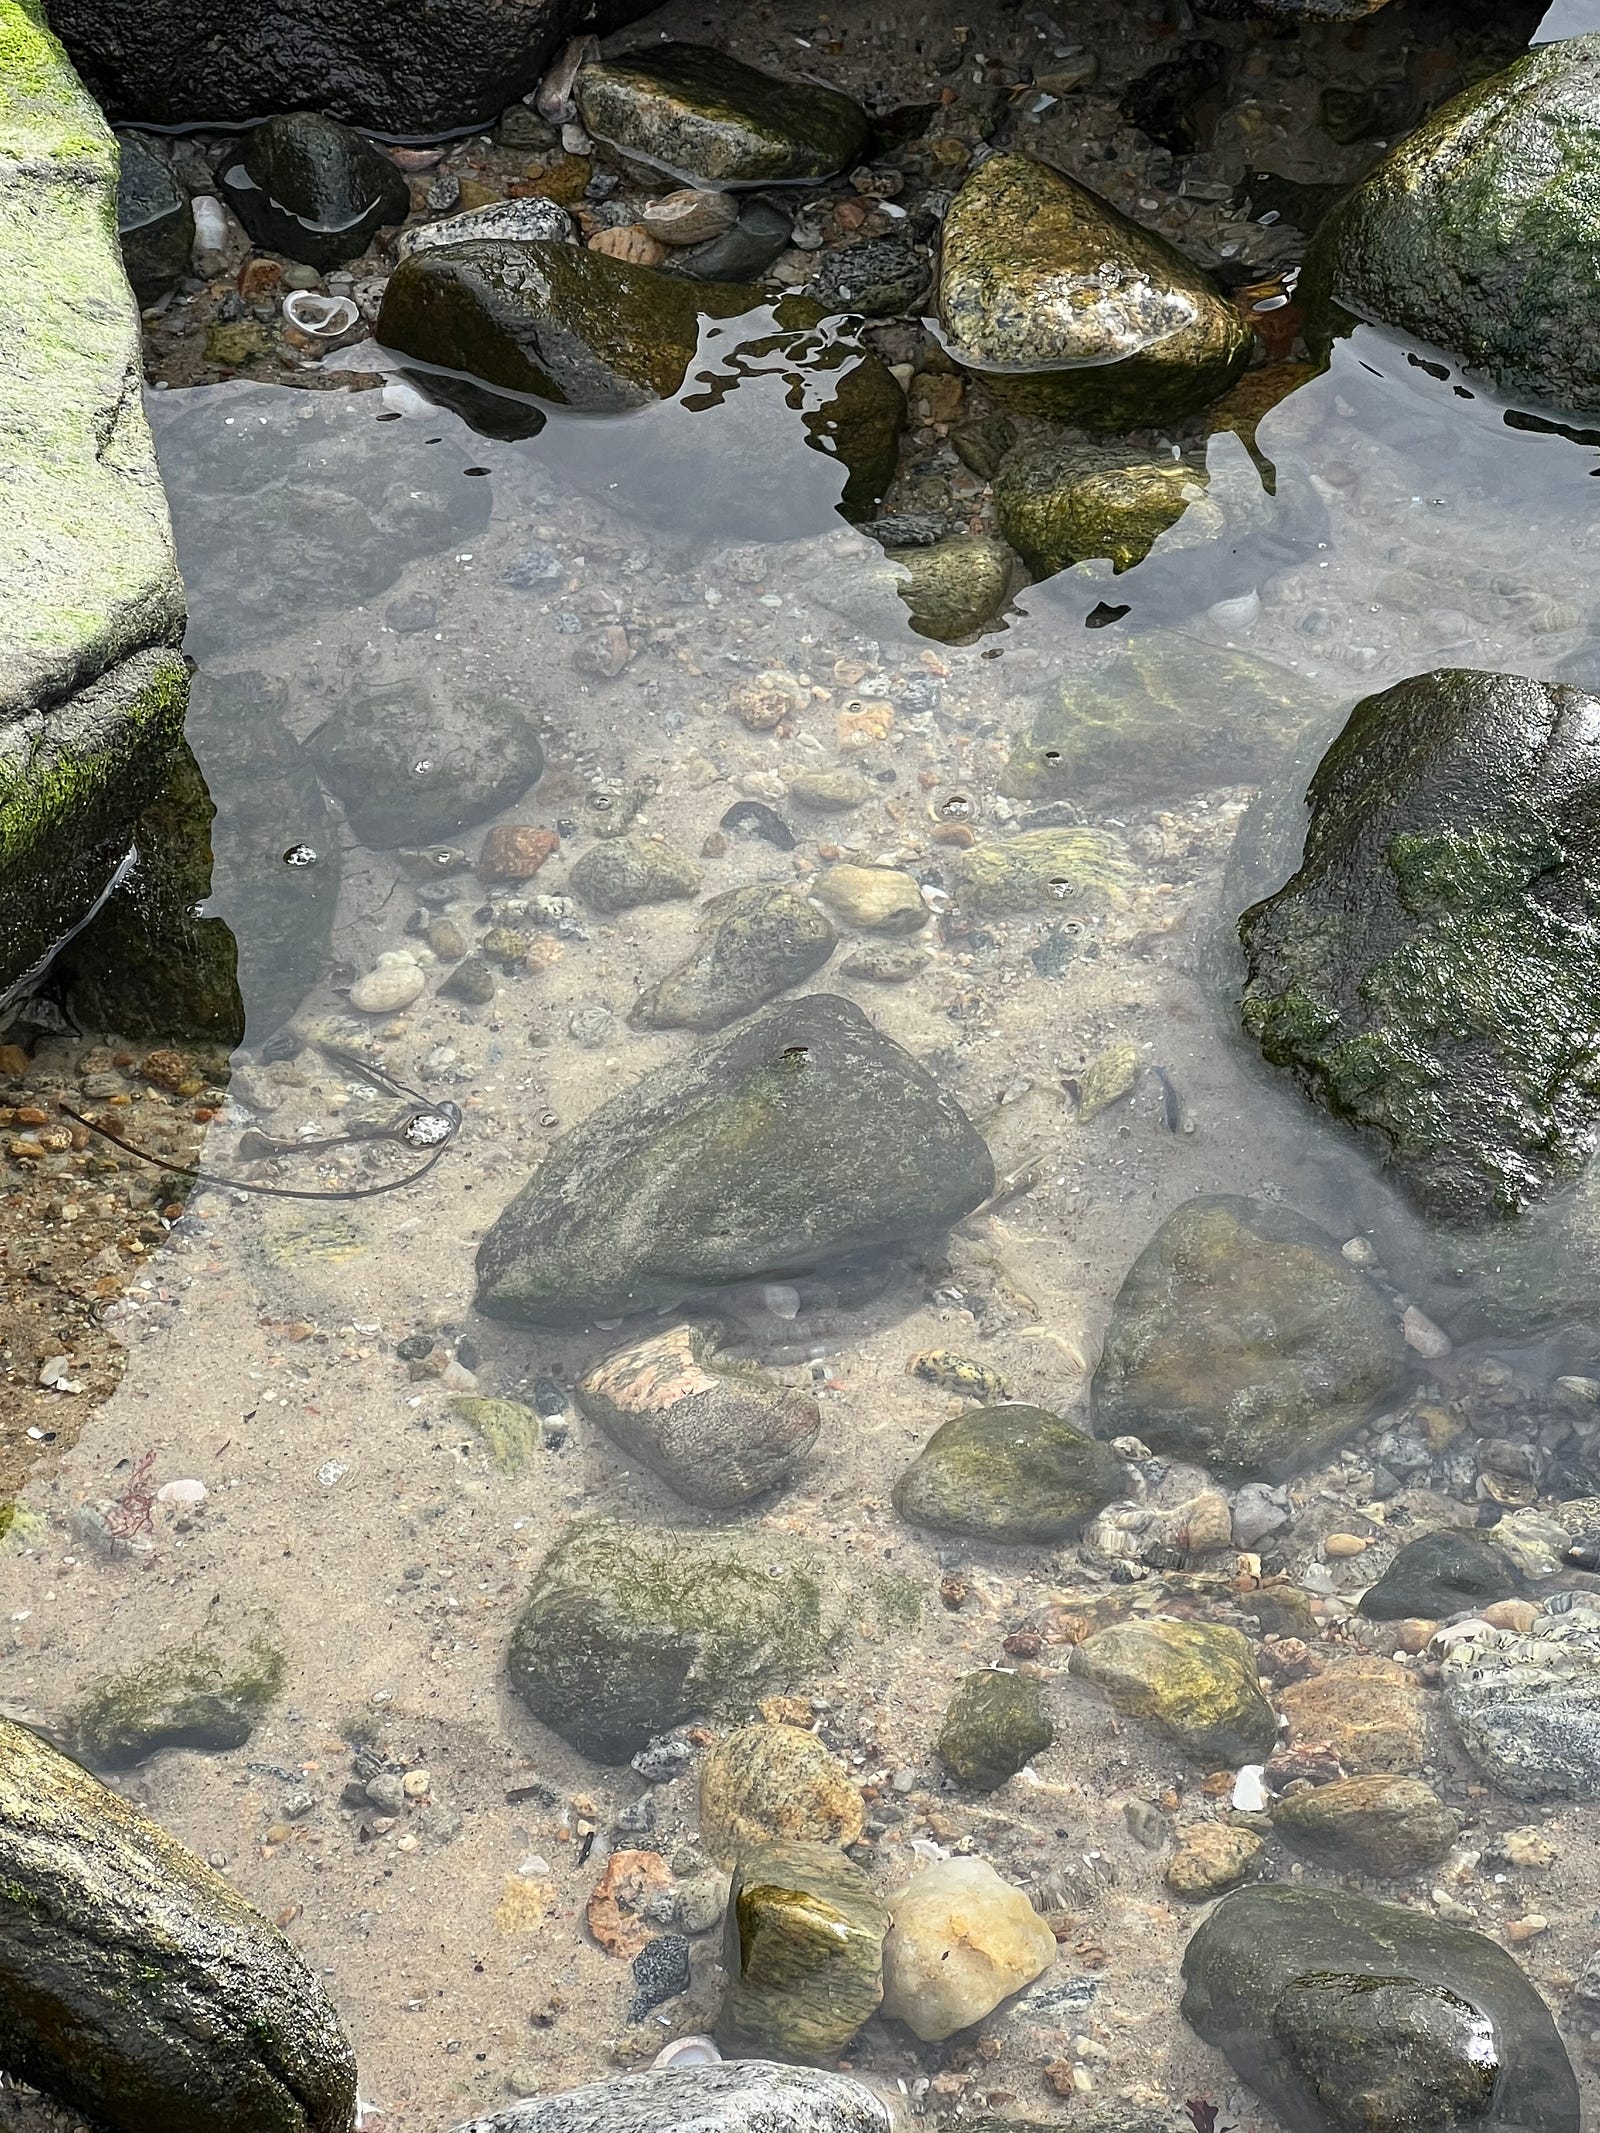 Photo of a tide pool on Long Island Sound. The waters are captured at a still moment through which the viewer can see the rocks, stones, sand, and shells of the tide pool. Photo by Ron Steed